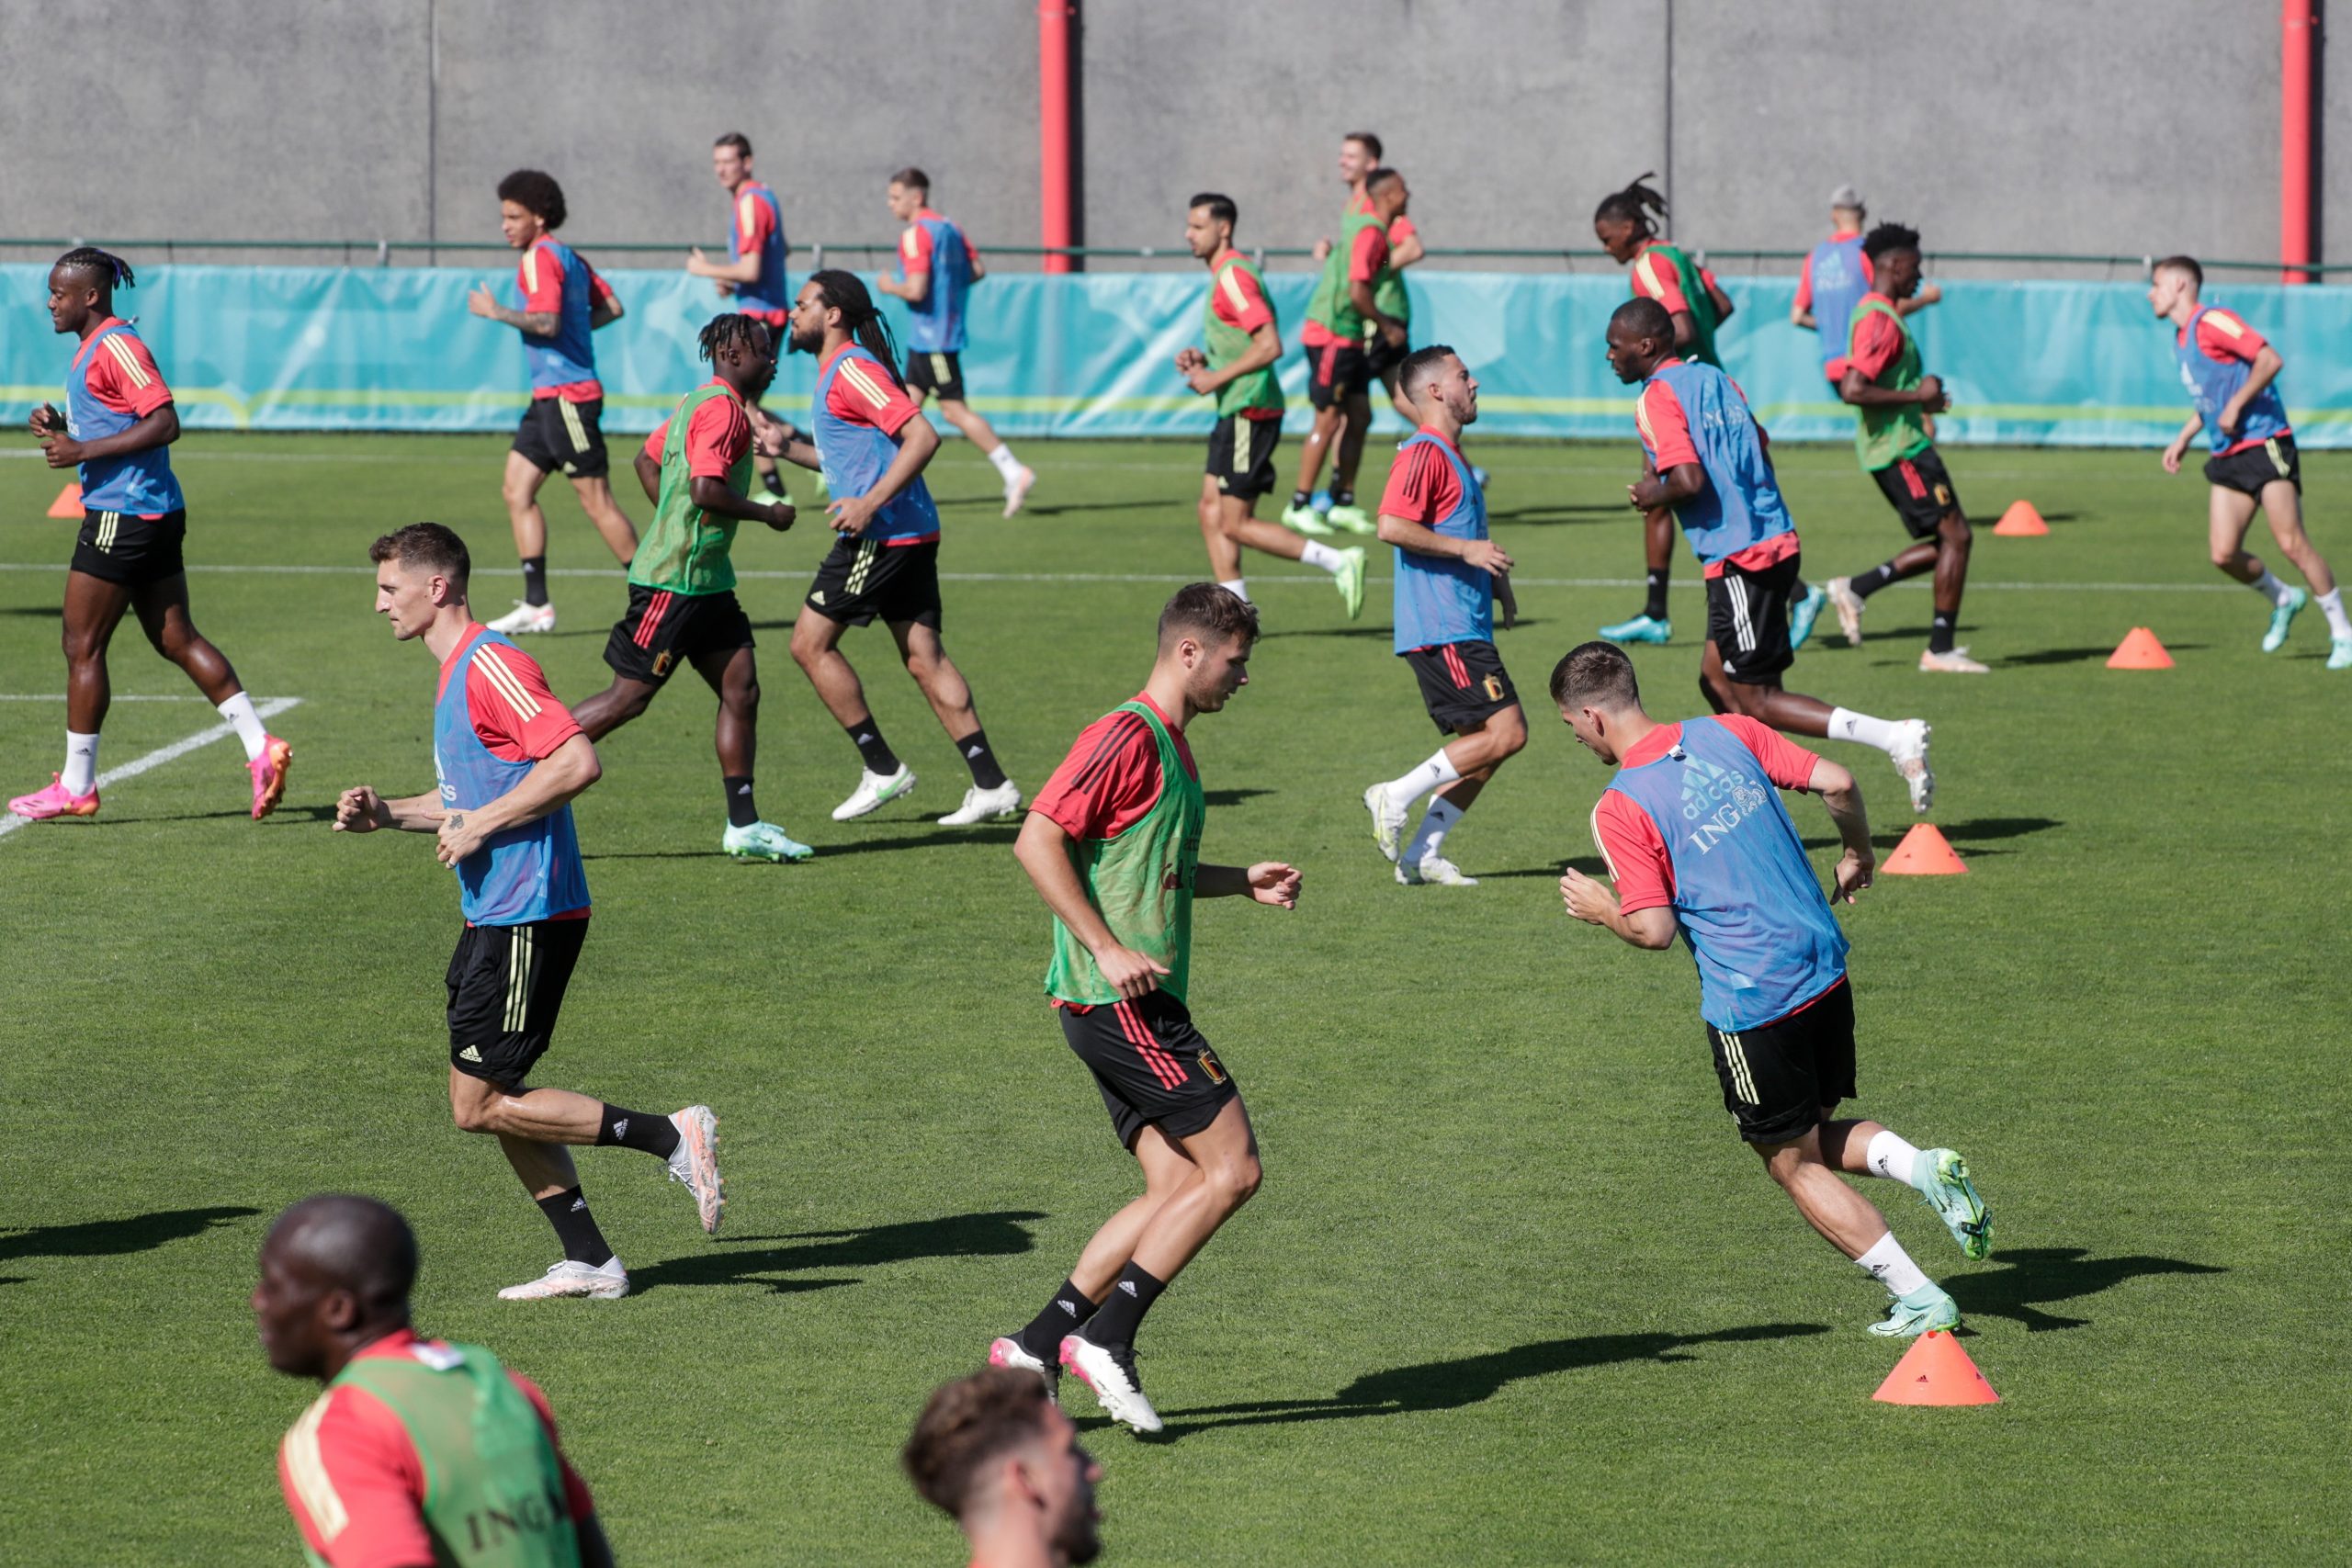 epa09260150 Belgian National soccer team players attend a training session as part of the preparations for EURO 2020 in Tubize, Belgium, 10 June 2021. The UEFA EURO 2020 soccer tournament will be held from 11 June to 11 July 2021.  EPA/STEPHANIE LECOCQ